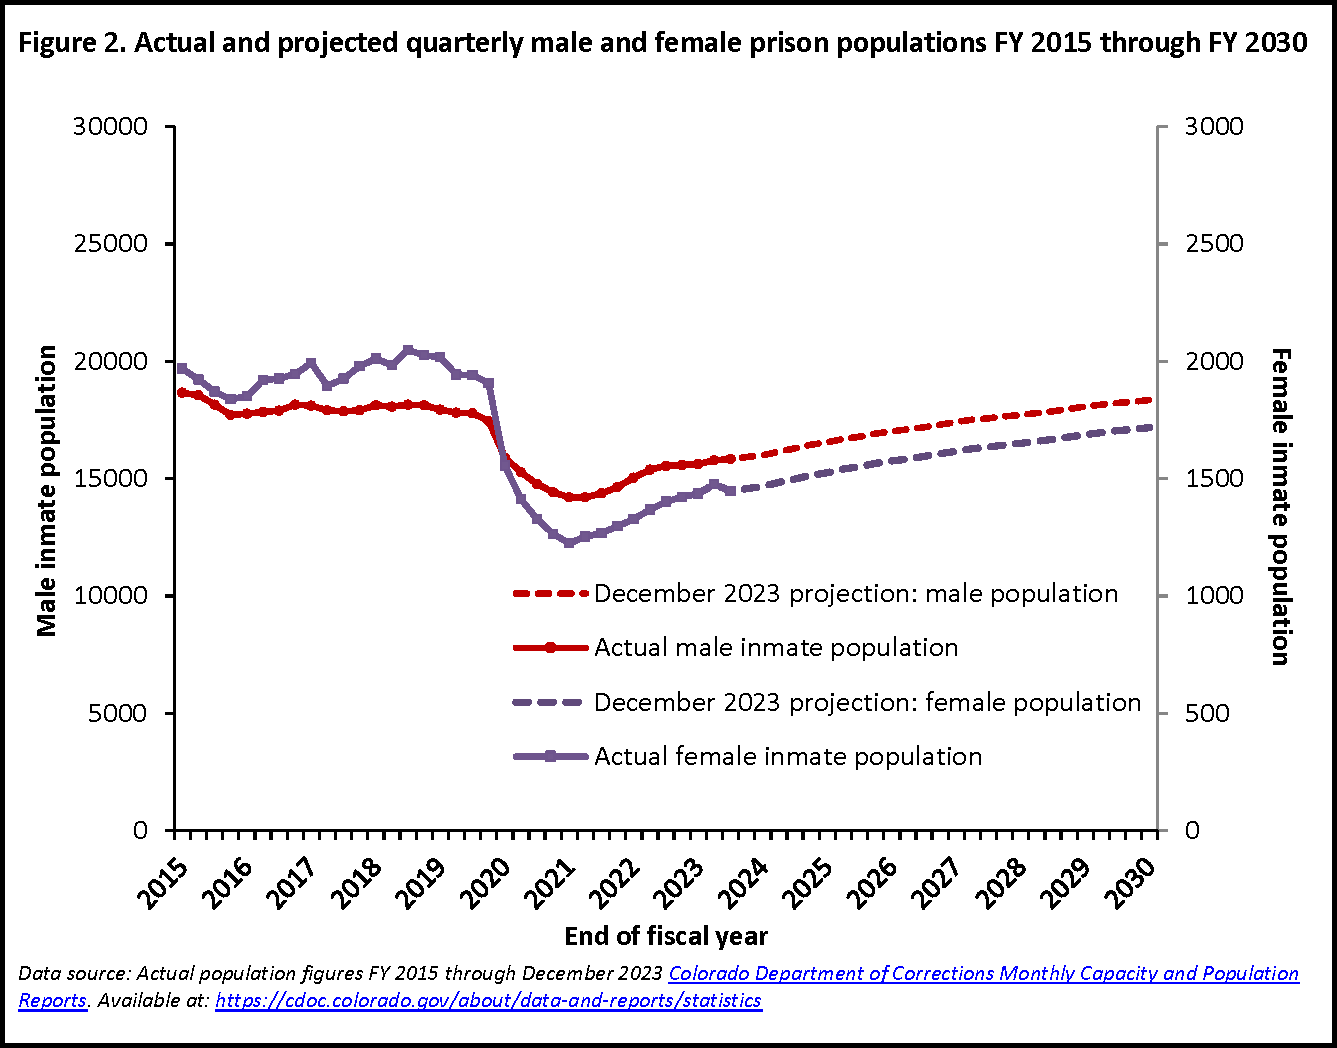 Fig 2: Actual and Projected Quarterly Male and Female Prison Populations, FY 2015 through FY 2030